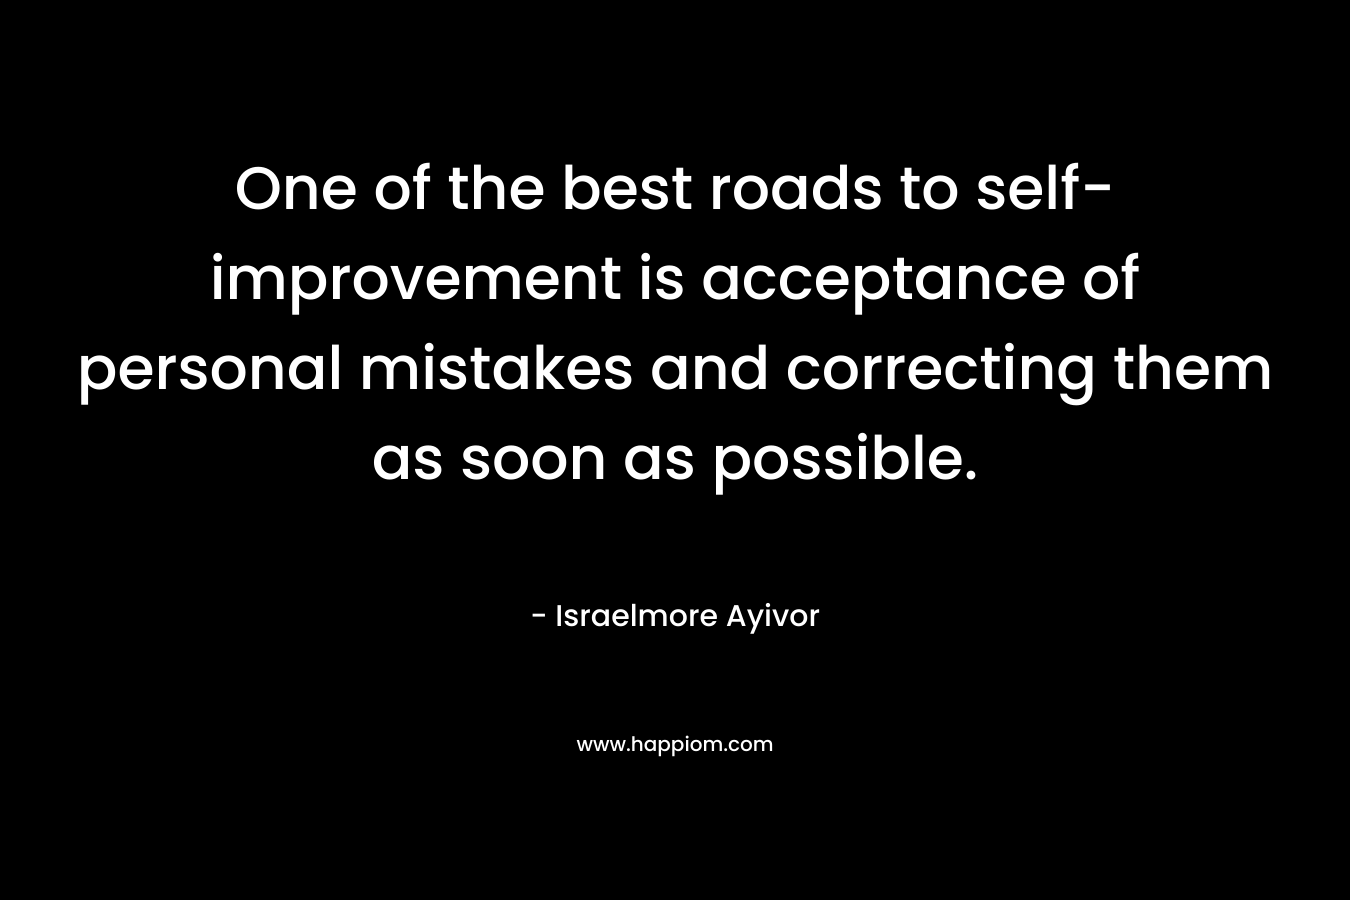 One of the best roads to self-improvement is acceptance of personal mistakes and correcting them as soon as possible.